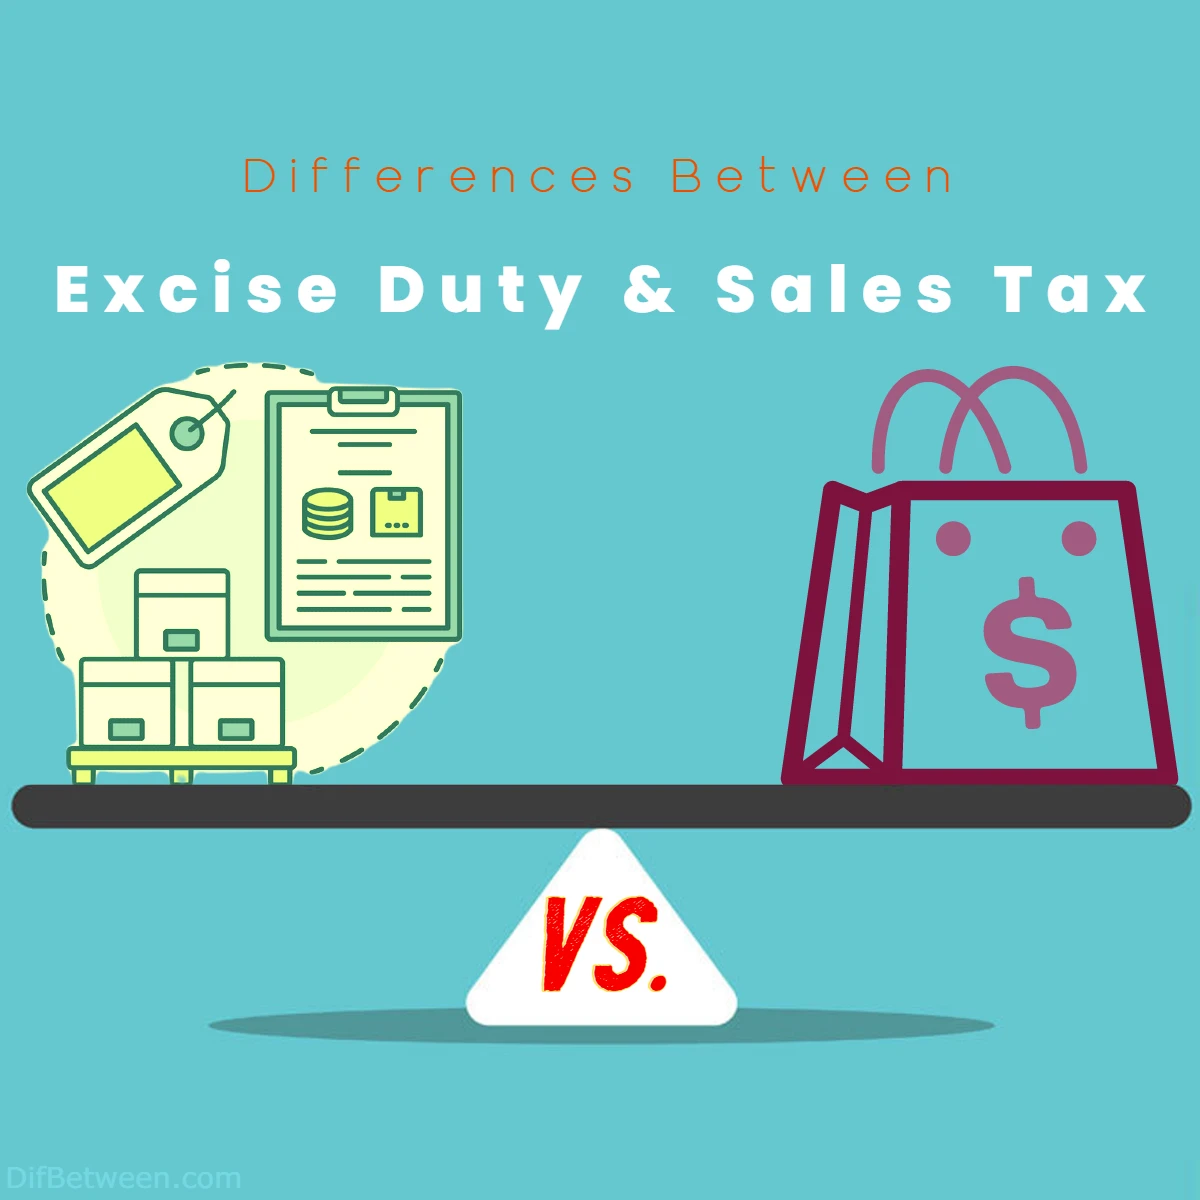 Differences Between Sales Tax and Excise Duty